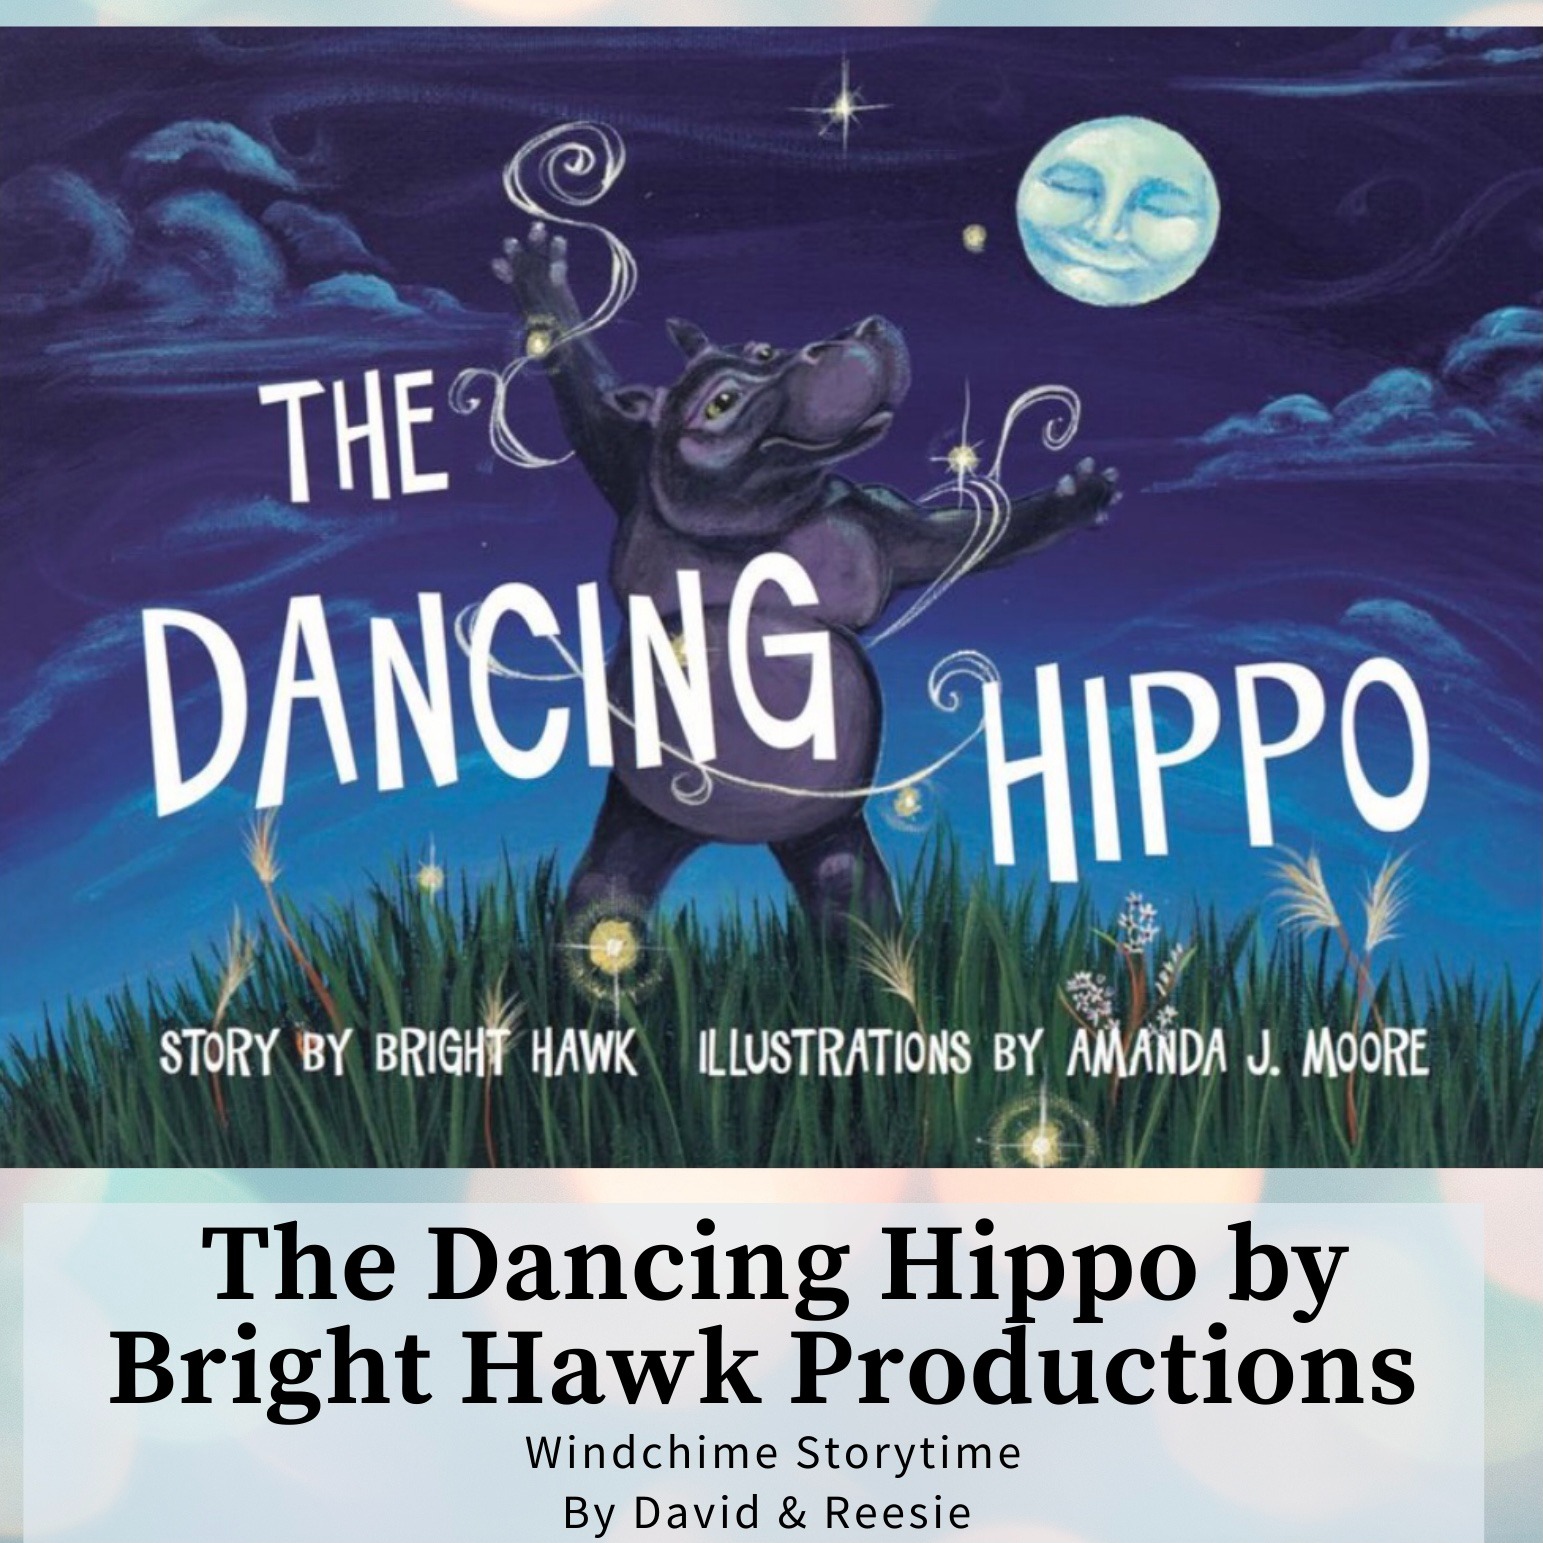 15- The Dancing Hippo by Bright Hawk Productions